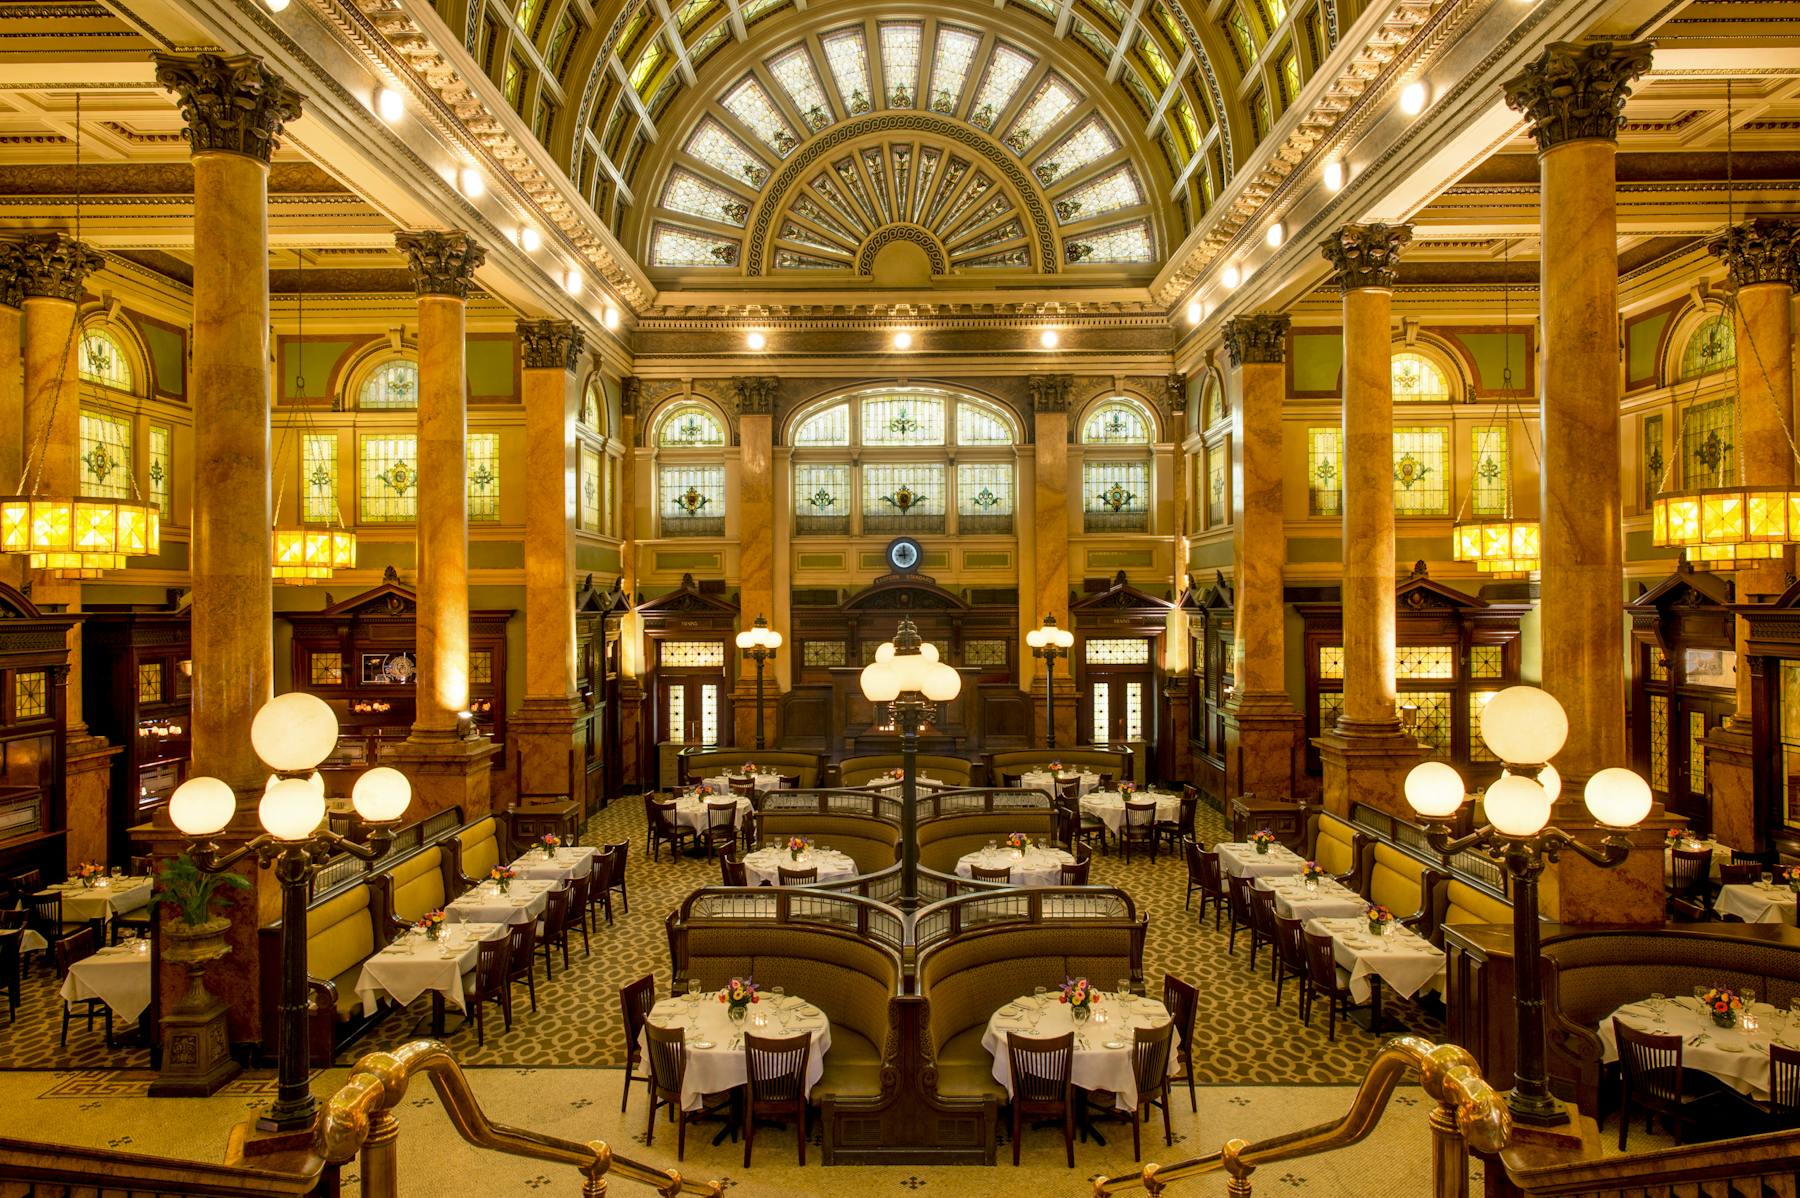 Main Dining Room | Grand Concourse | Upscale Dining | Unmatched Grandeur